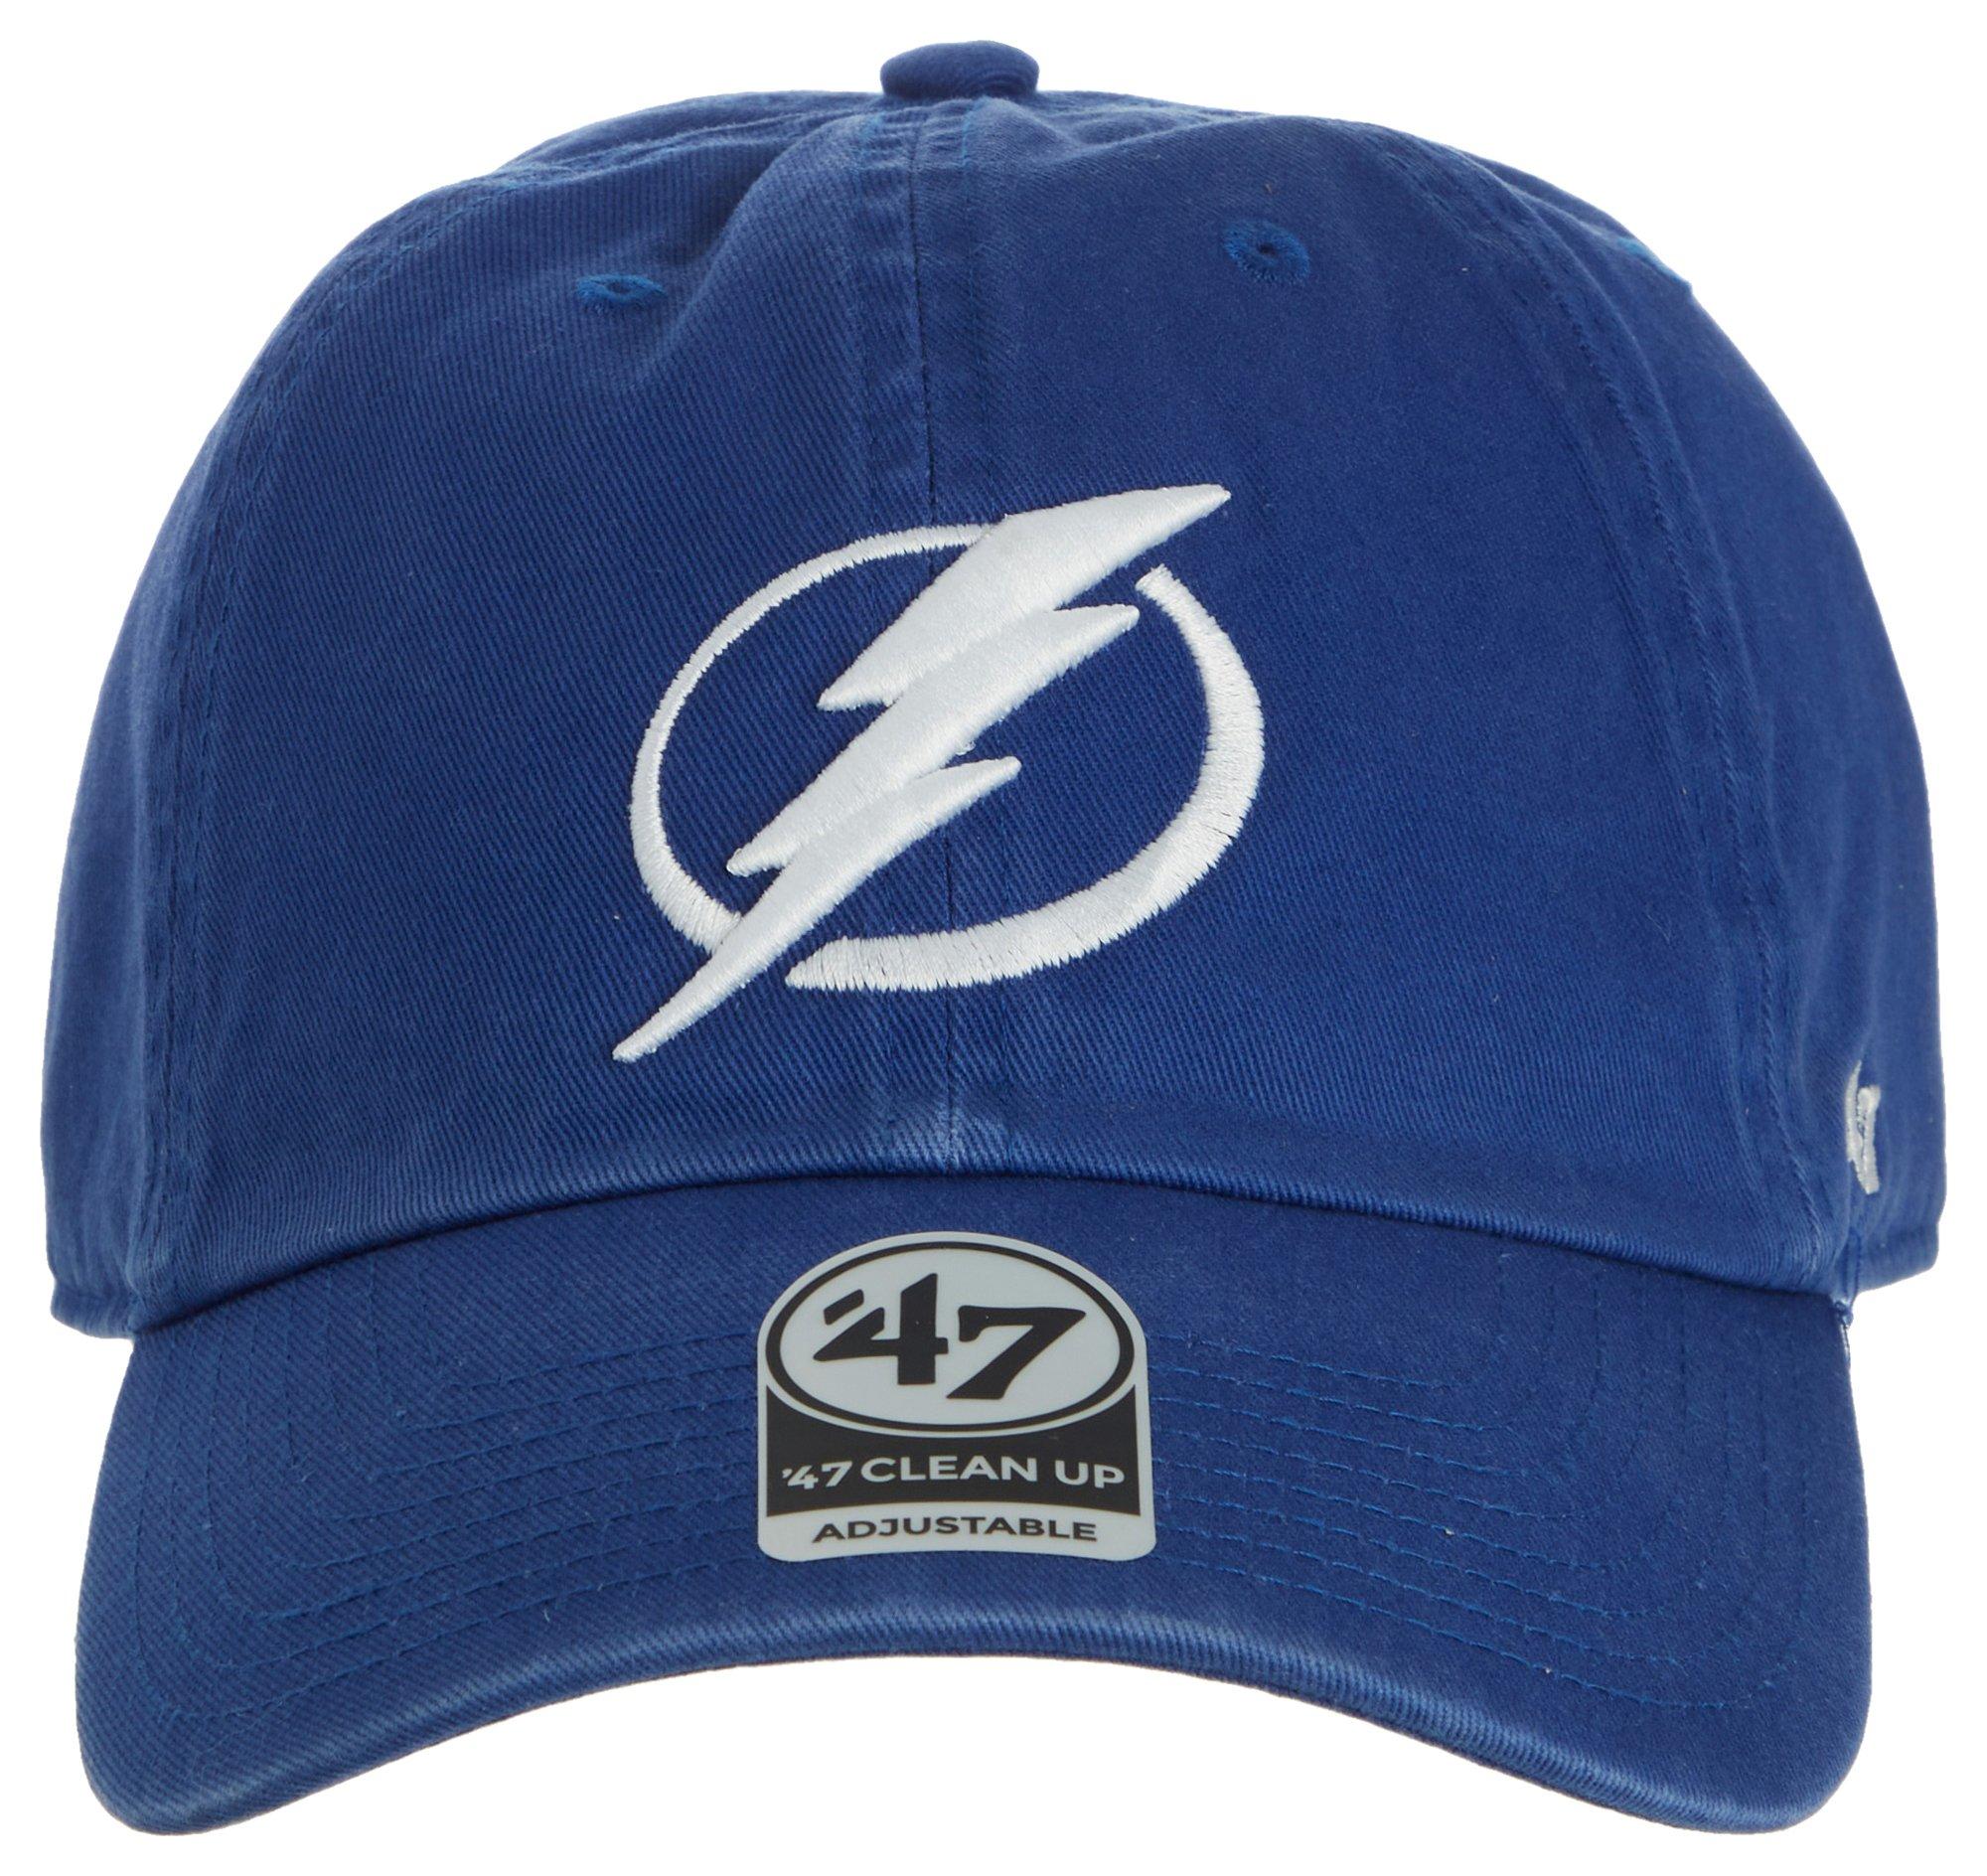 Tampa Bay Lightning Adjustable Clean Up Cap By '47